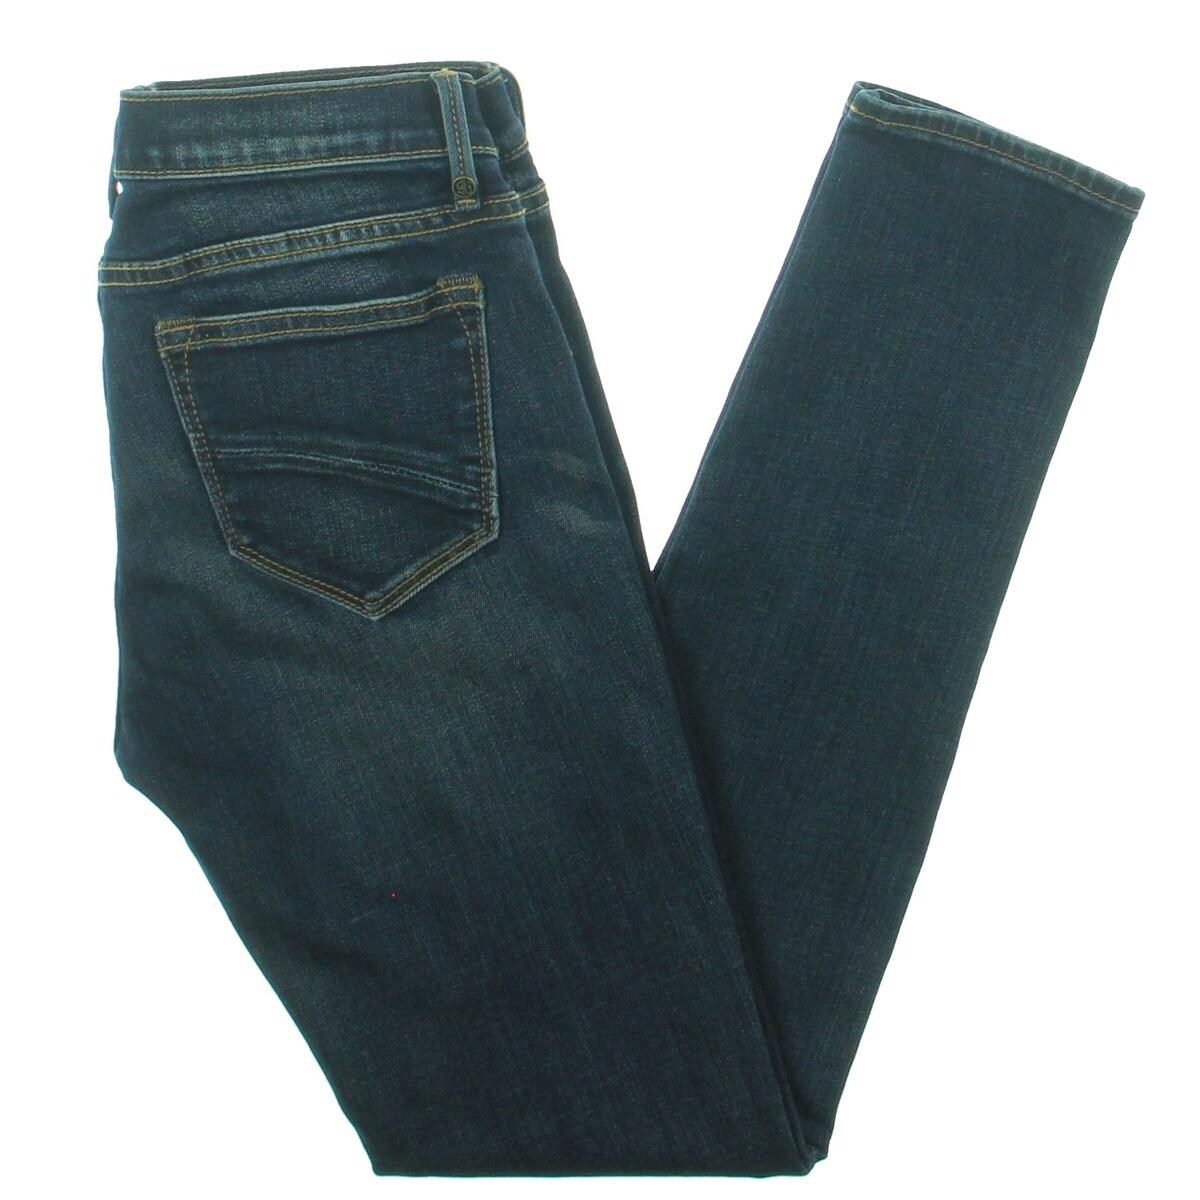 driftwood jeans sizing